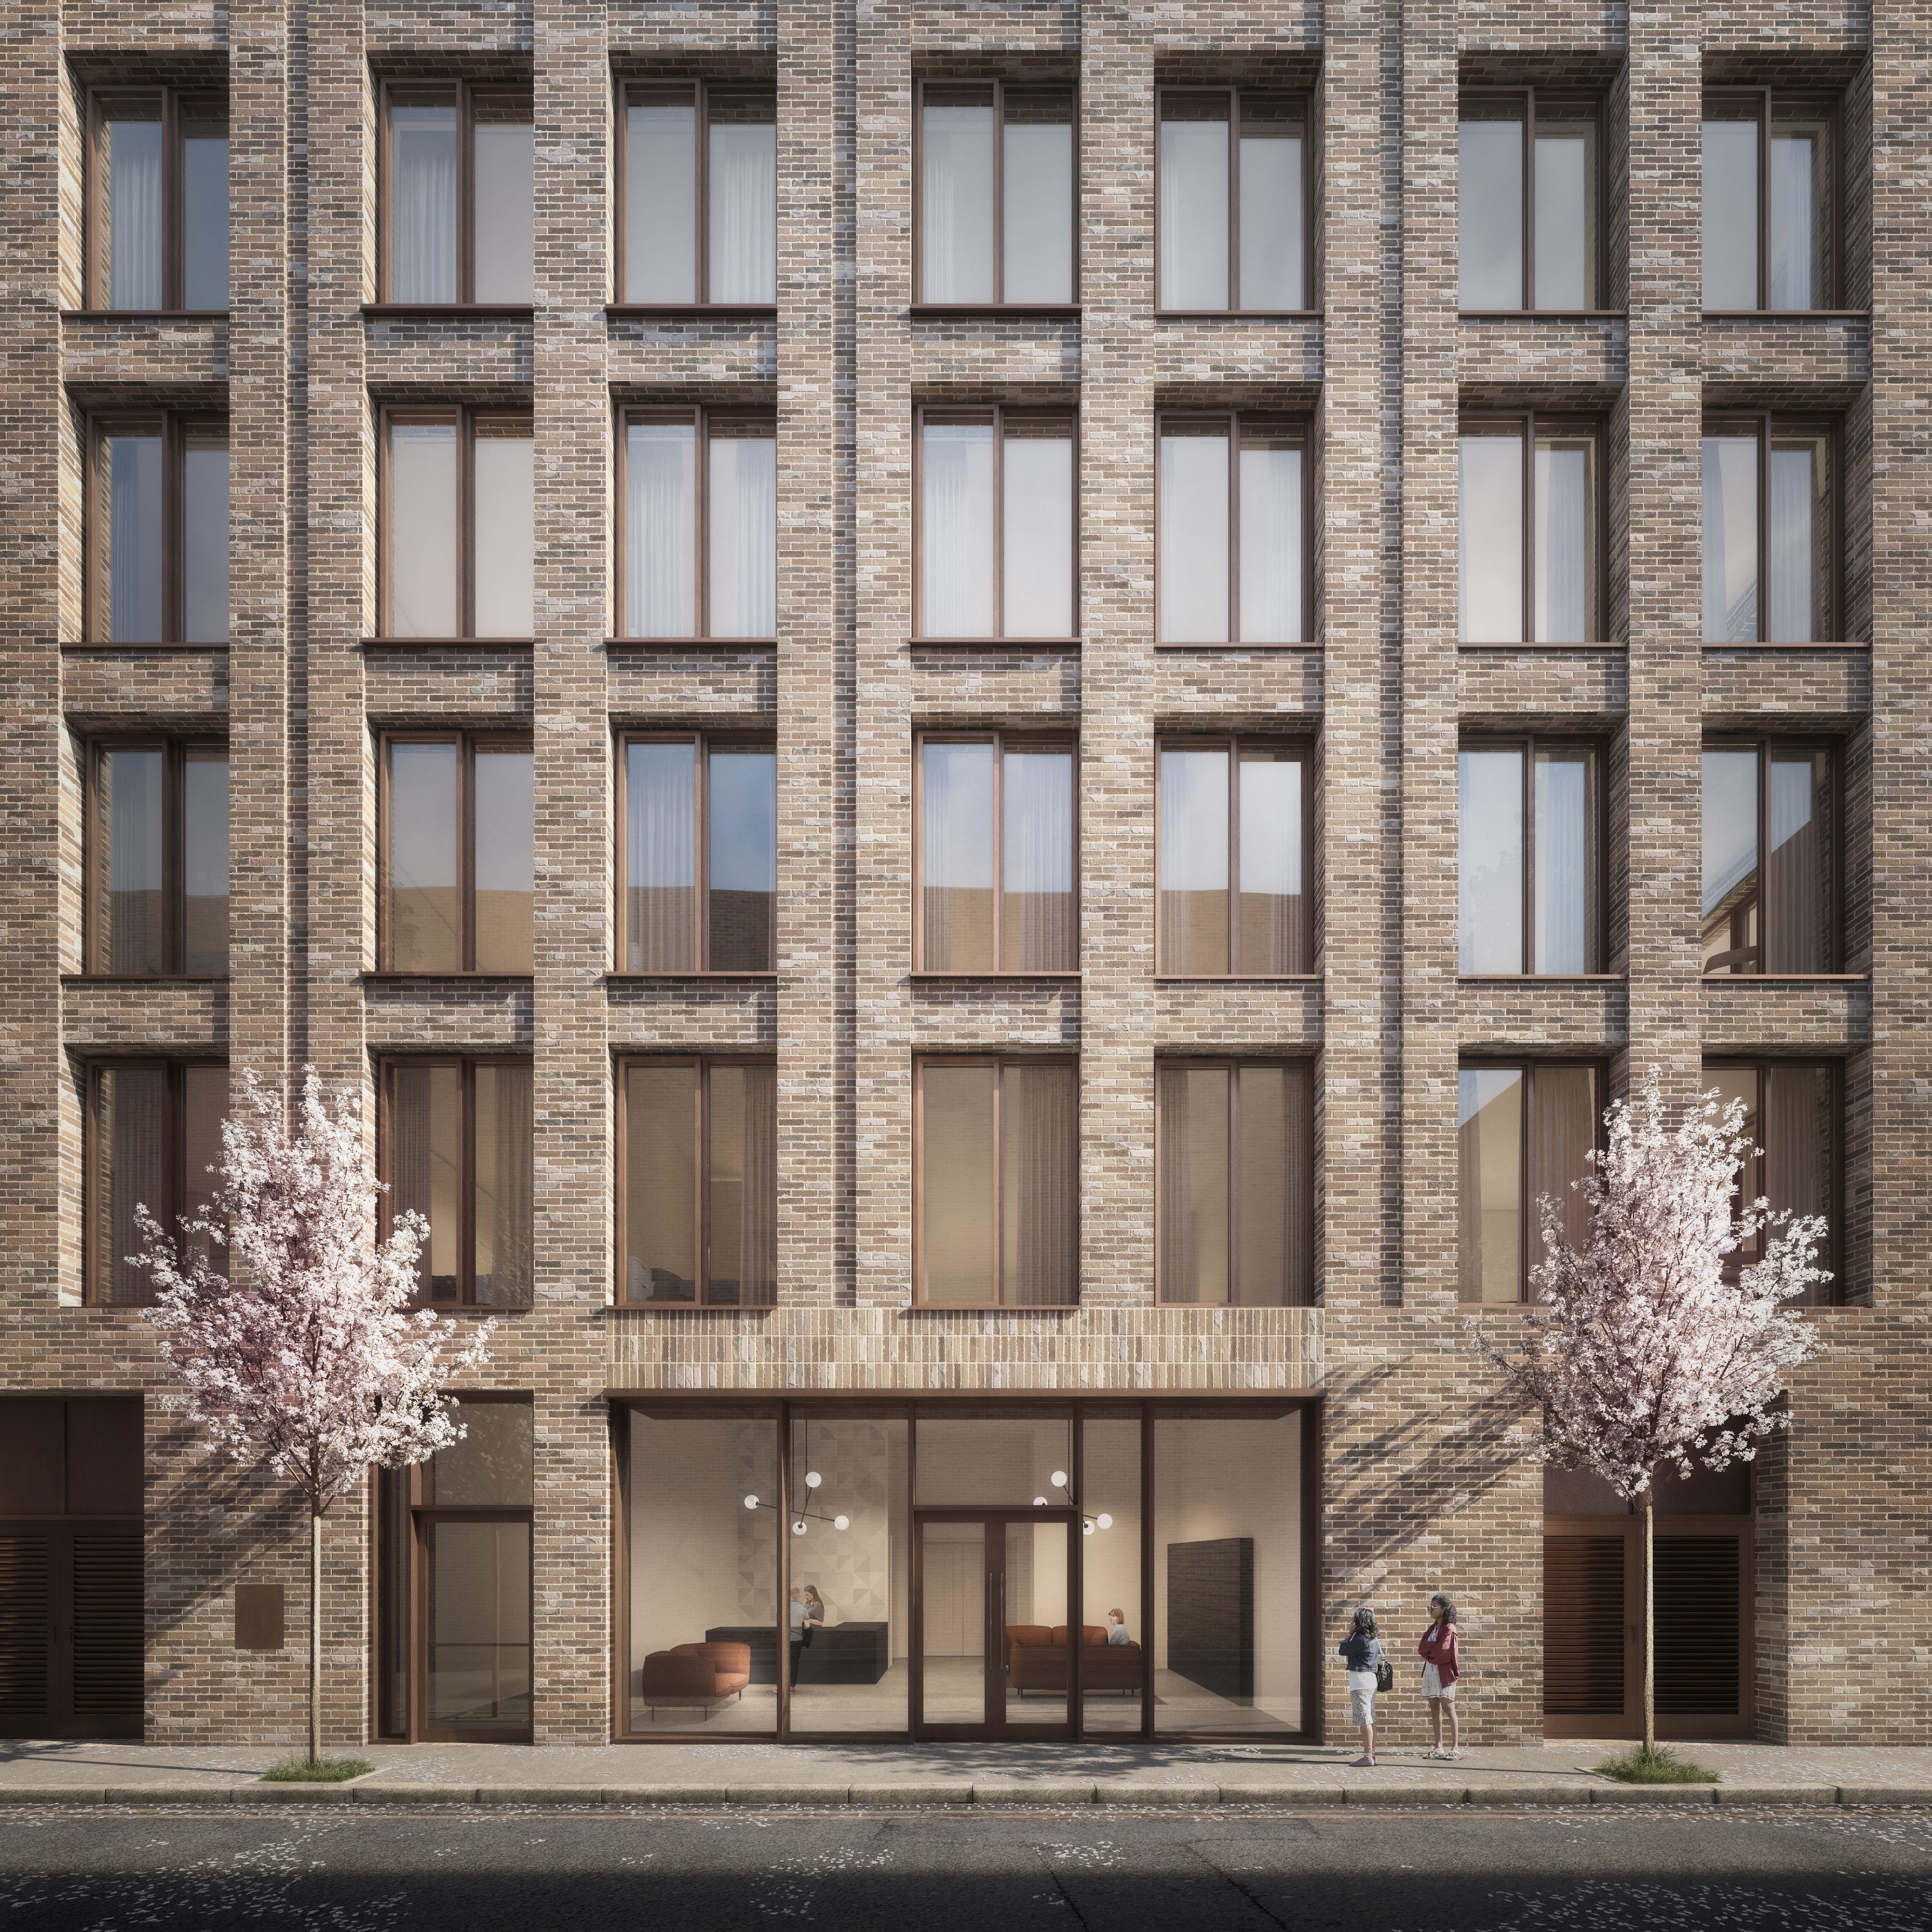  Design-driven residential development unveiled in Manchester's Northern Quarter